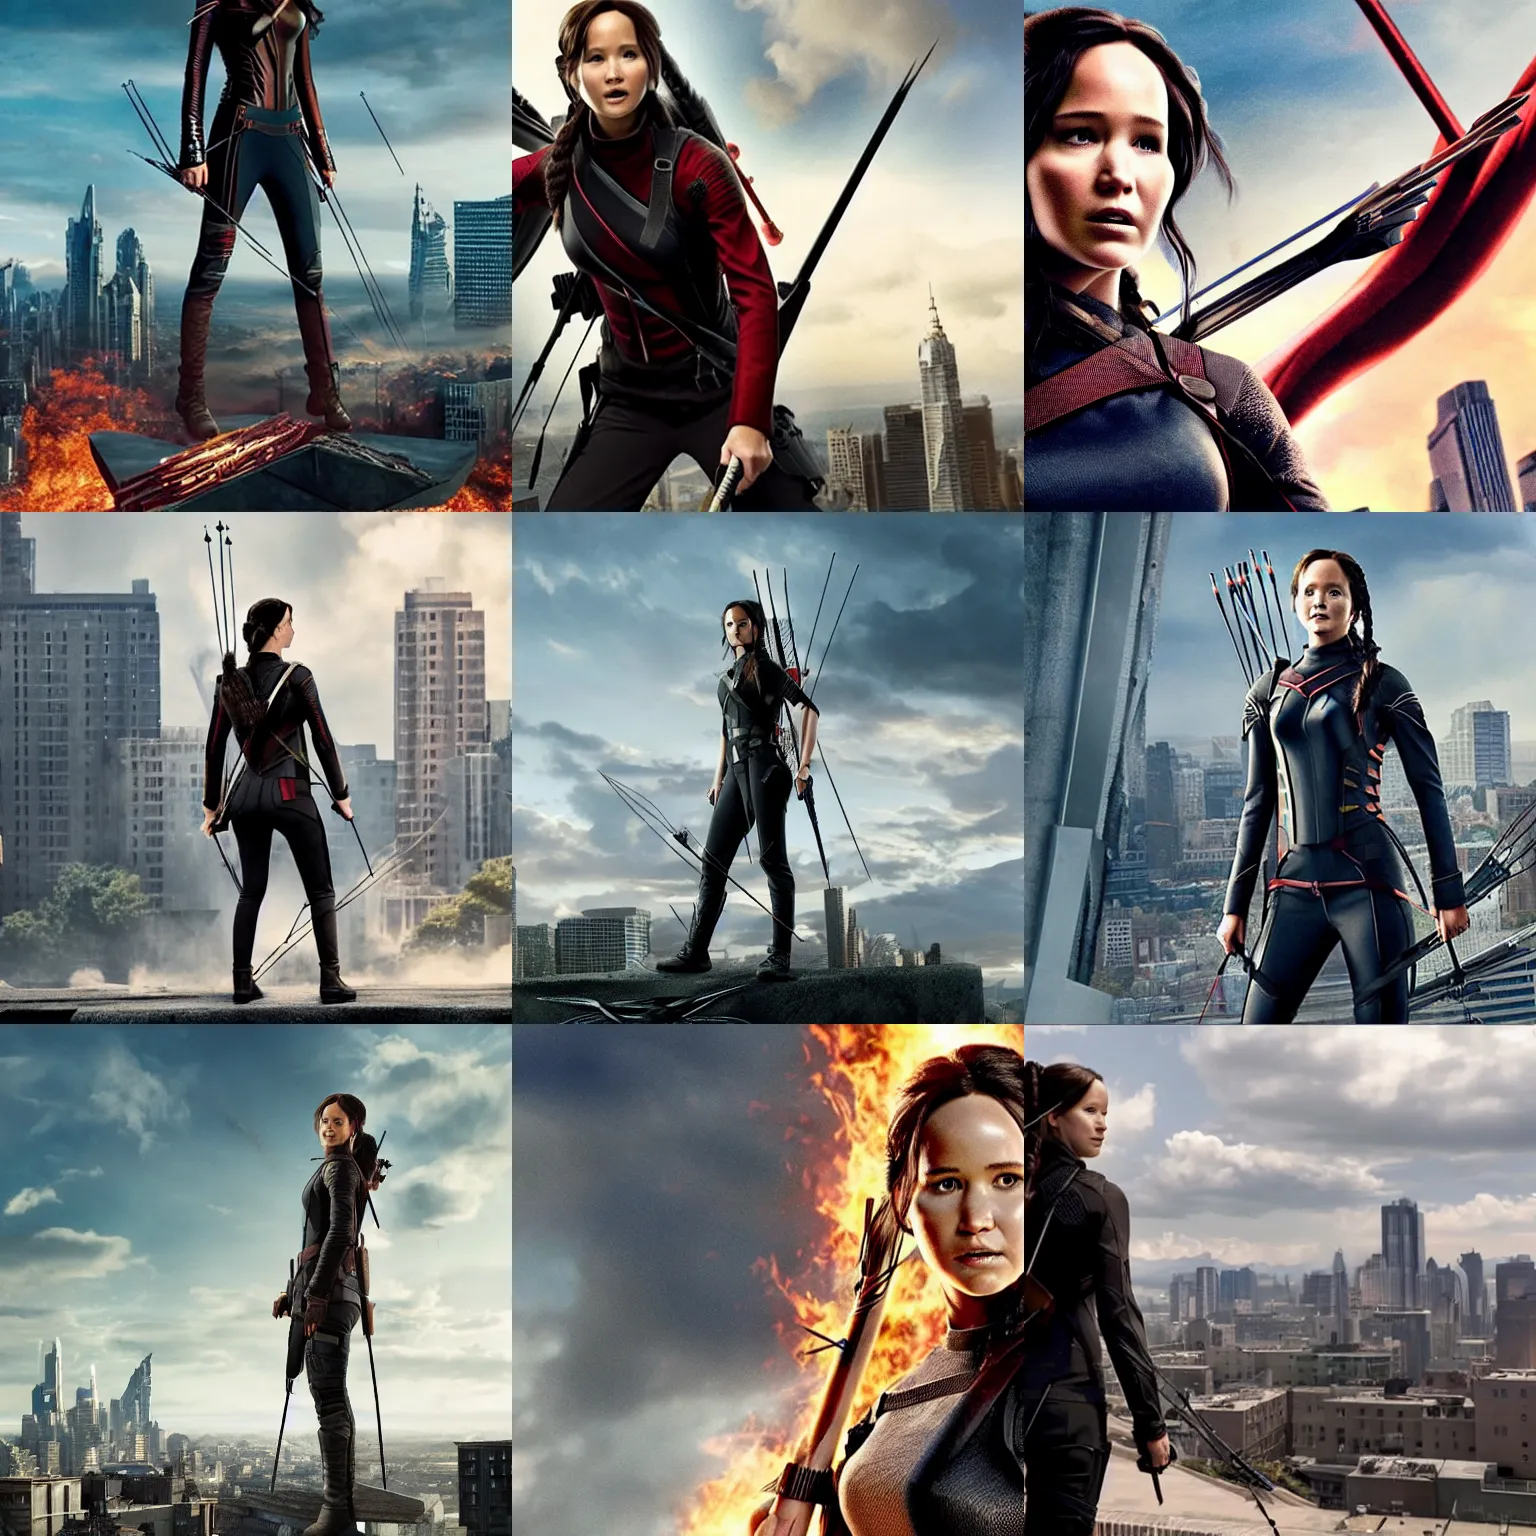 Prompt: Film still, Katniss Everdeen grows to an enormous size, towering over a city, from the Marvel movie 'Ant-Man and the Wasp' (2018)